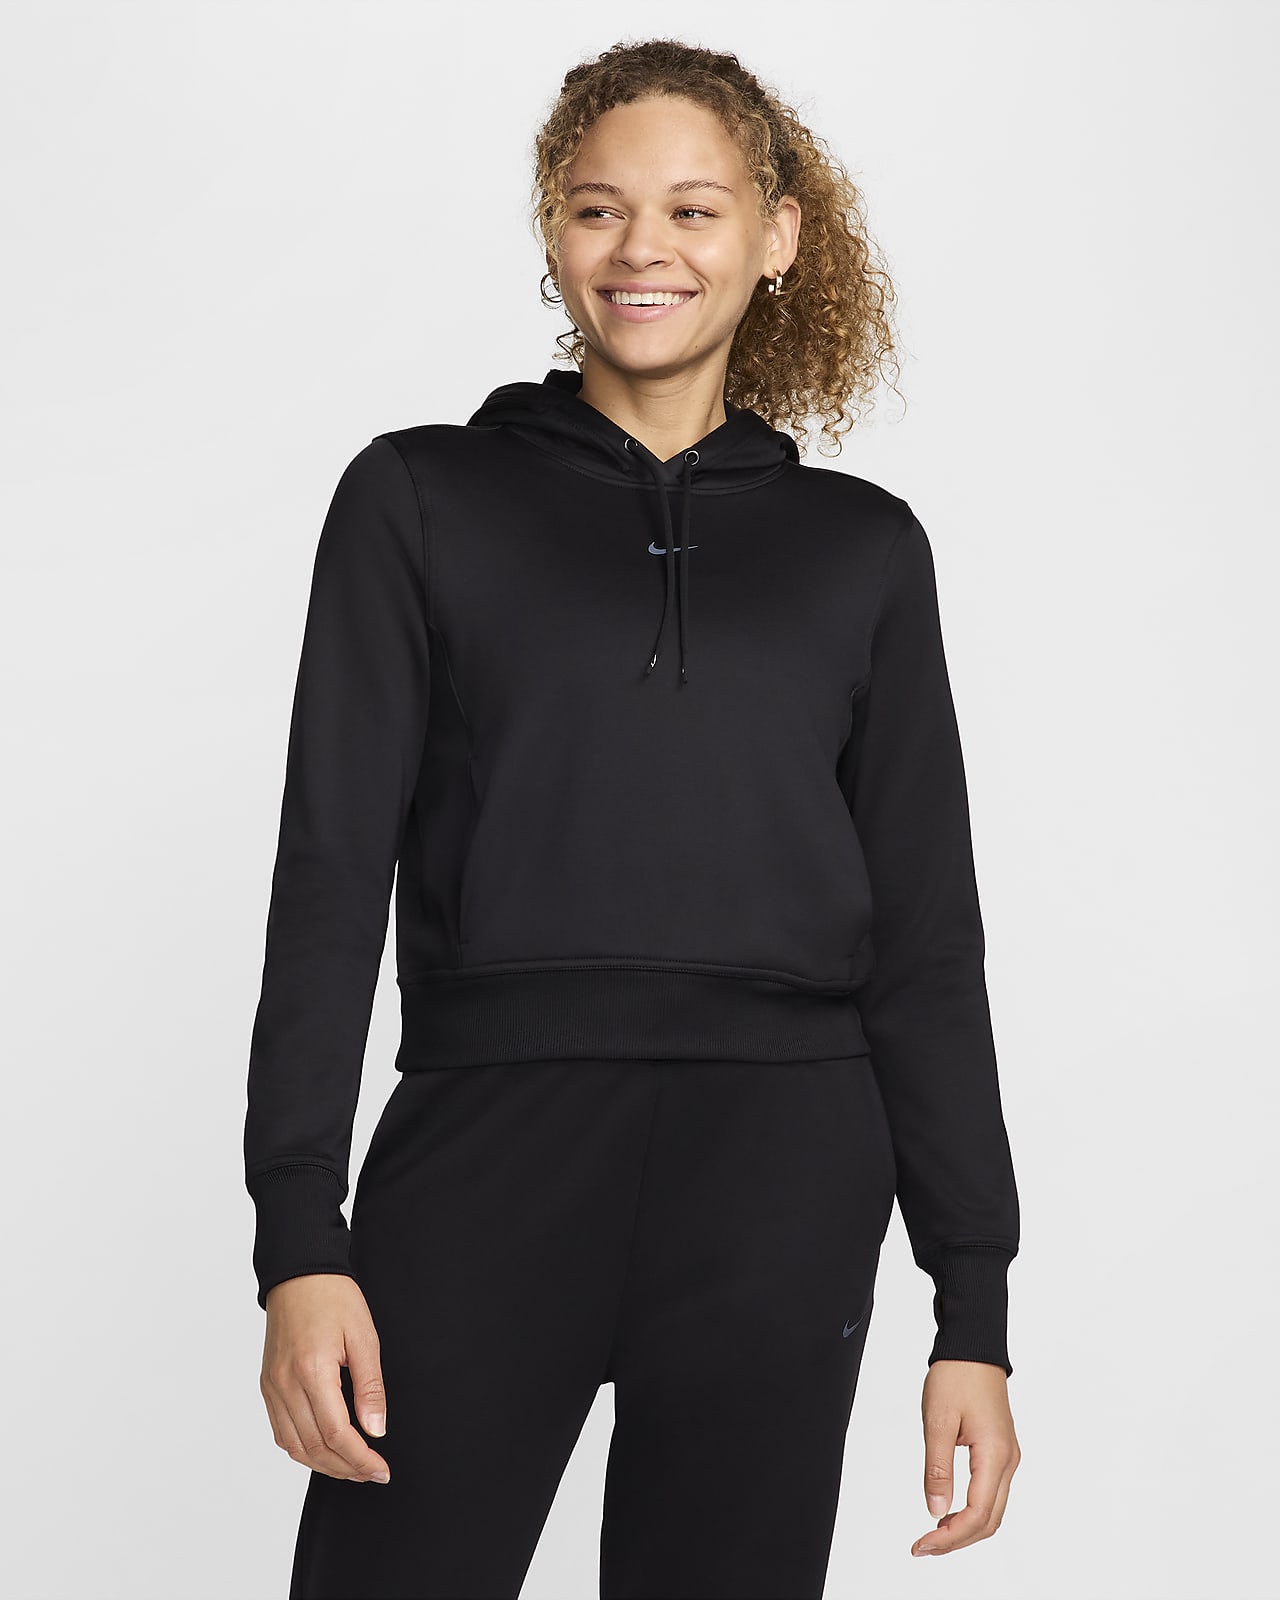 Hoodie pullover Nike Therma-FIT One para mulher